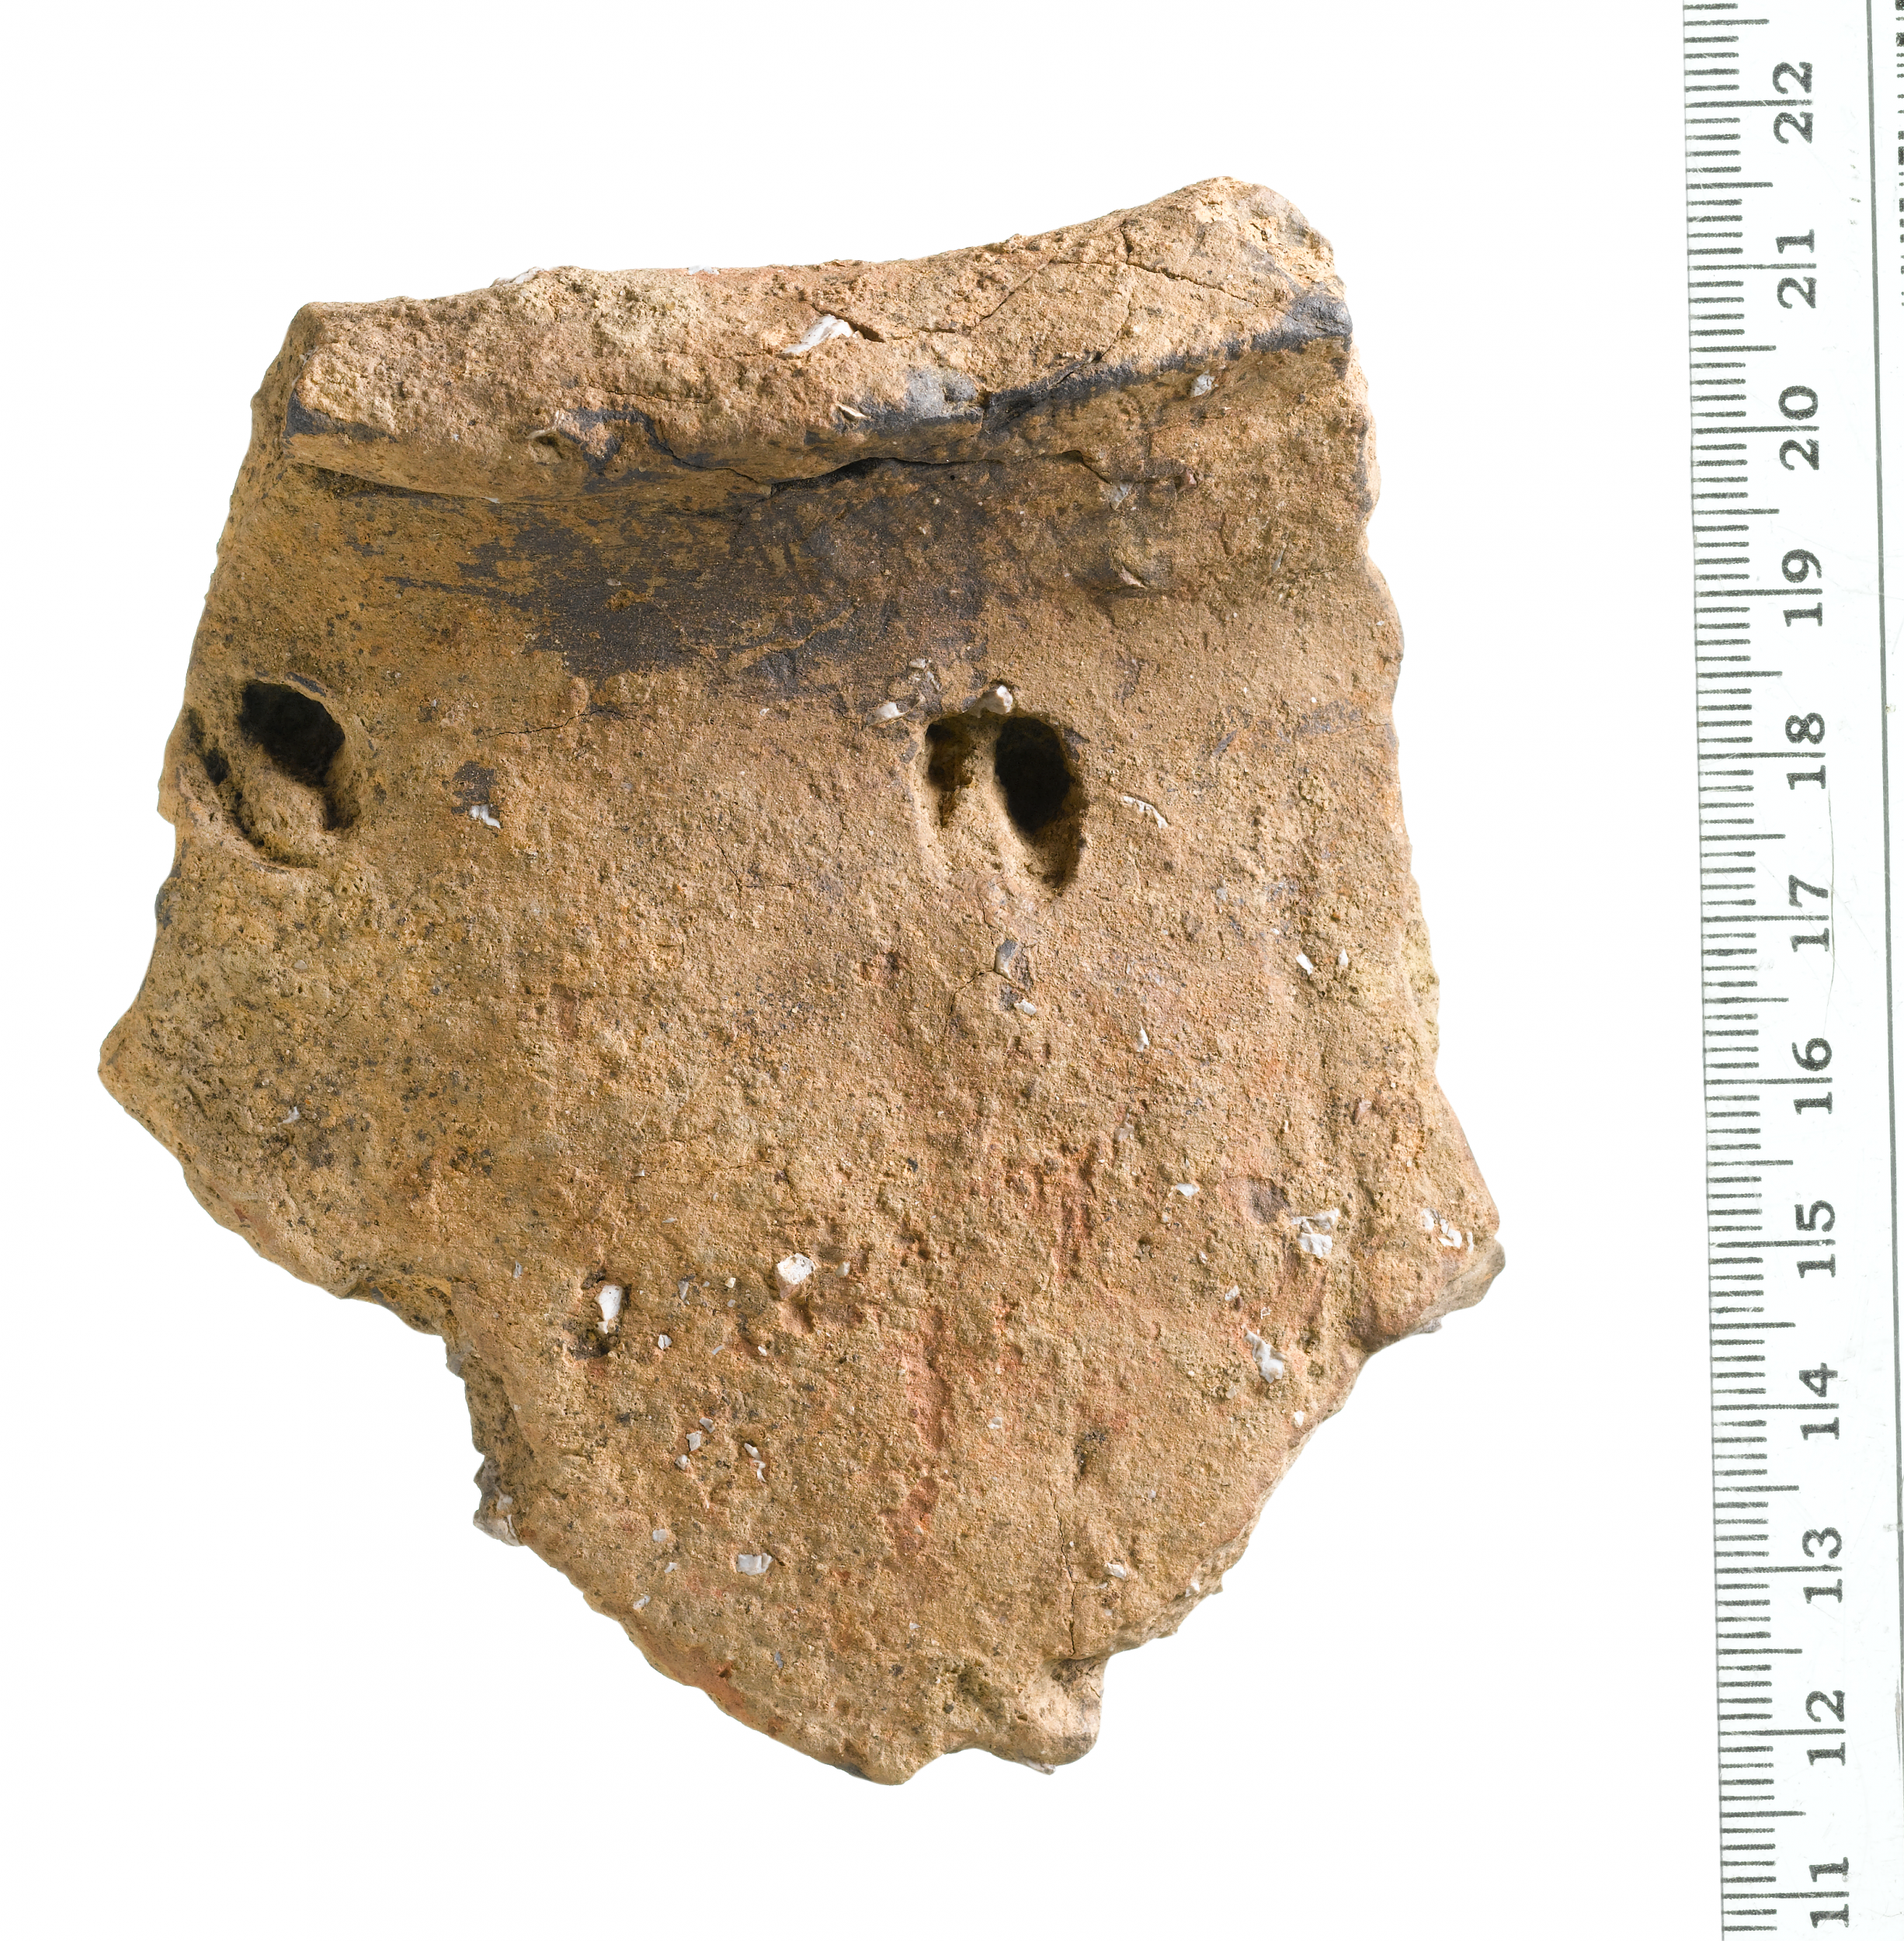 Fragment of a large round-shouldered, round-bottomed vessel with deep impressions widely spaced below the rim - the latter possibly created using the hoof of a dead roe deer faun. Residues found within suggest it was used to process meat stew